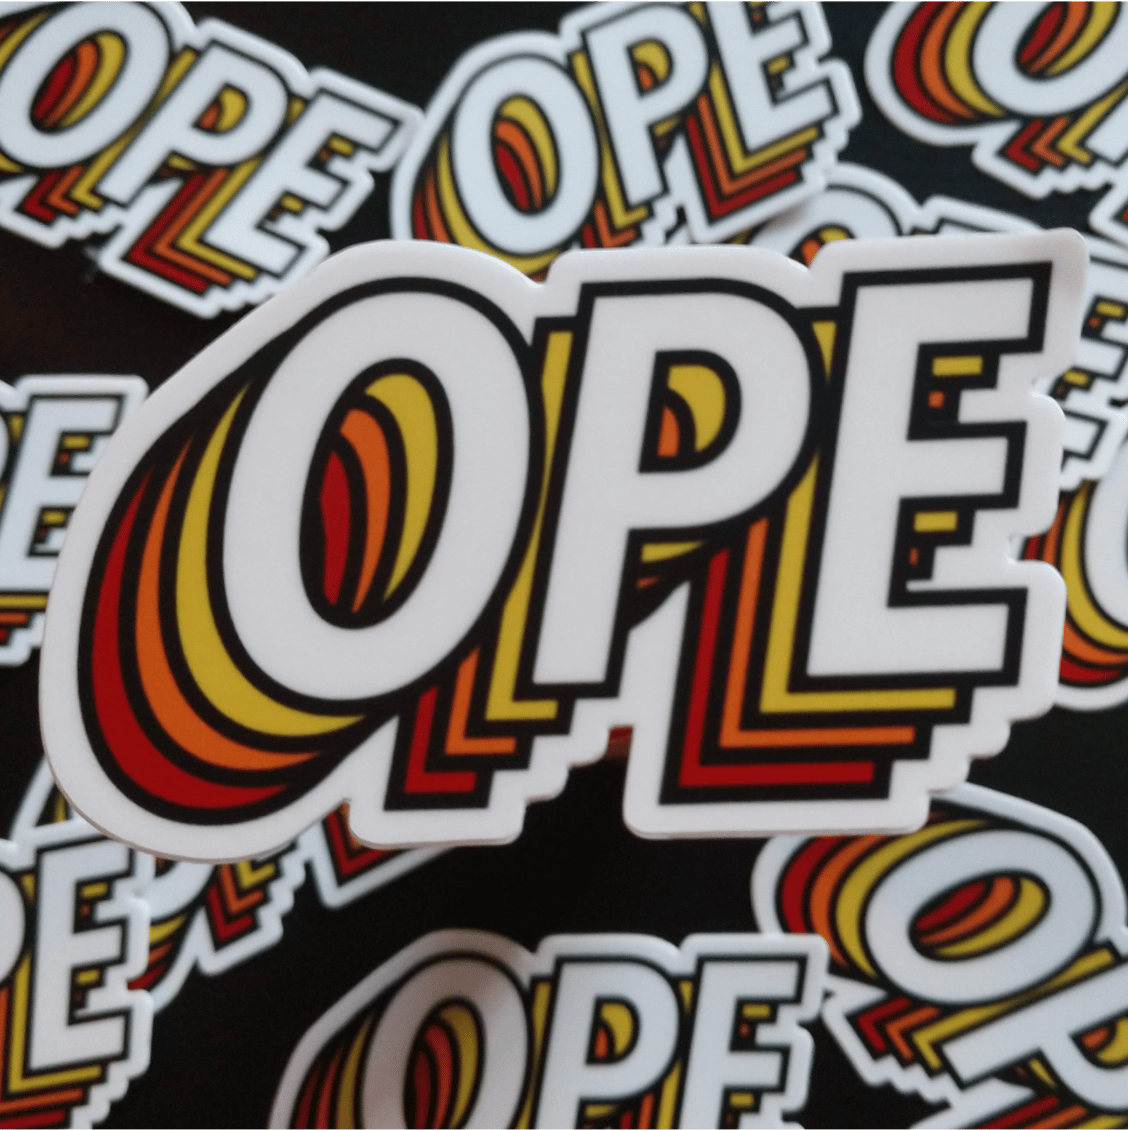 Ope Ope Sticker for Sale by kkerstingshop